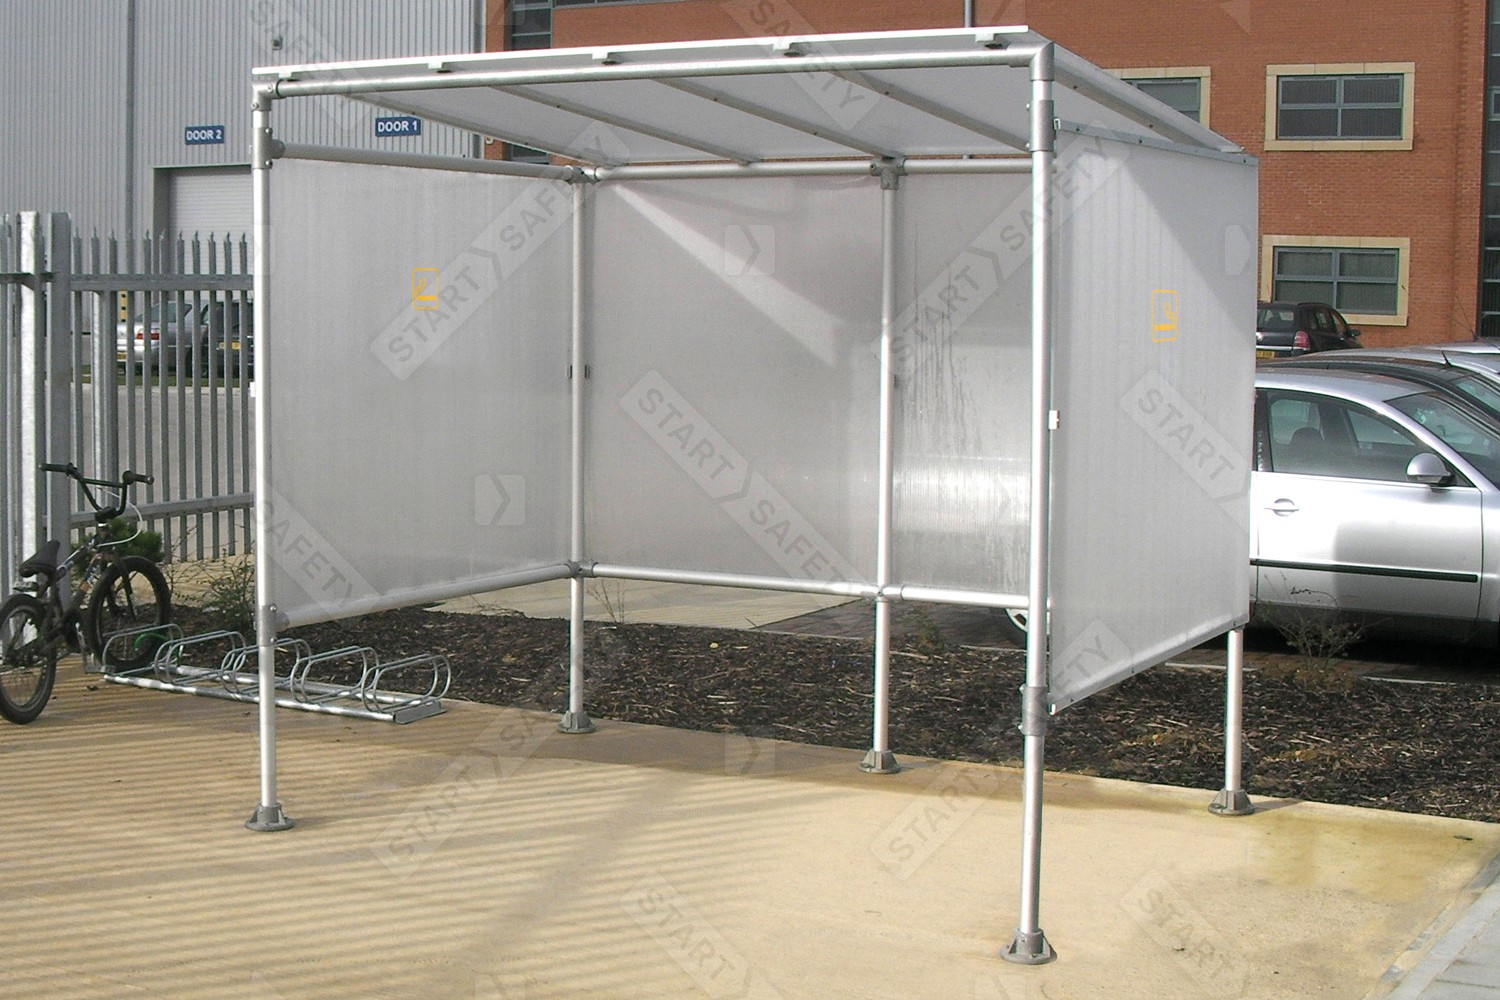 UK Compliant Procity Economy Smoking Shelter Installed In Car Park